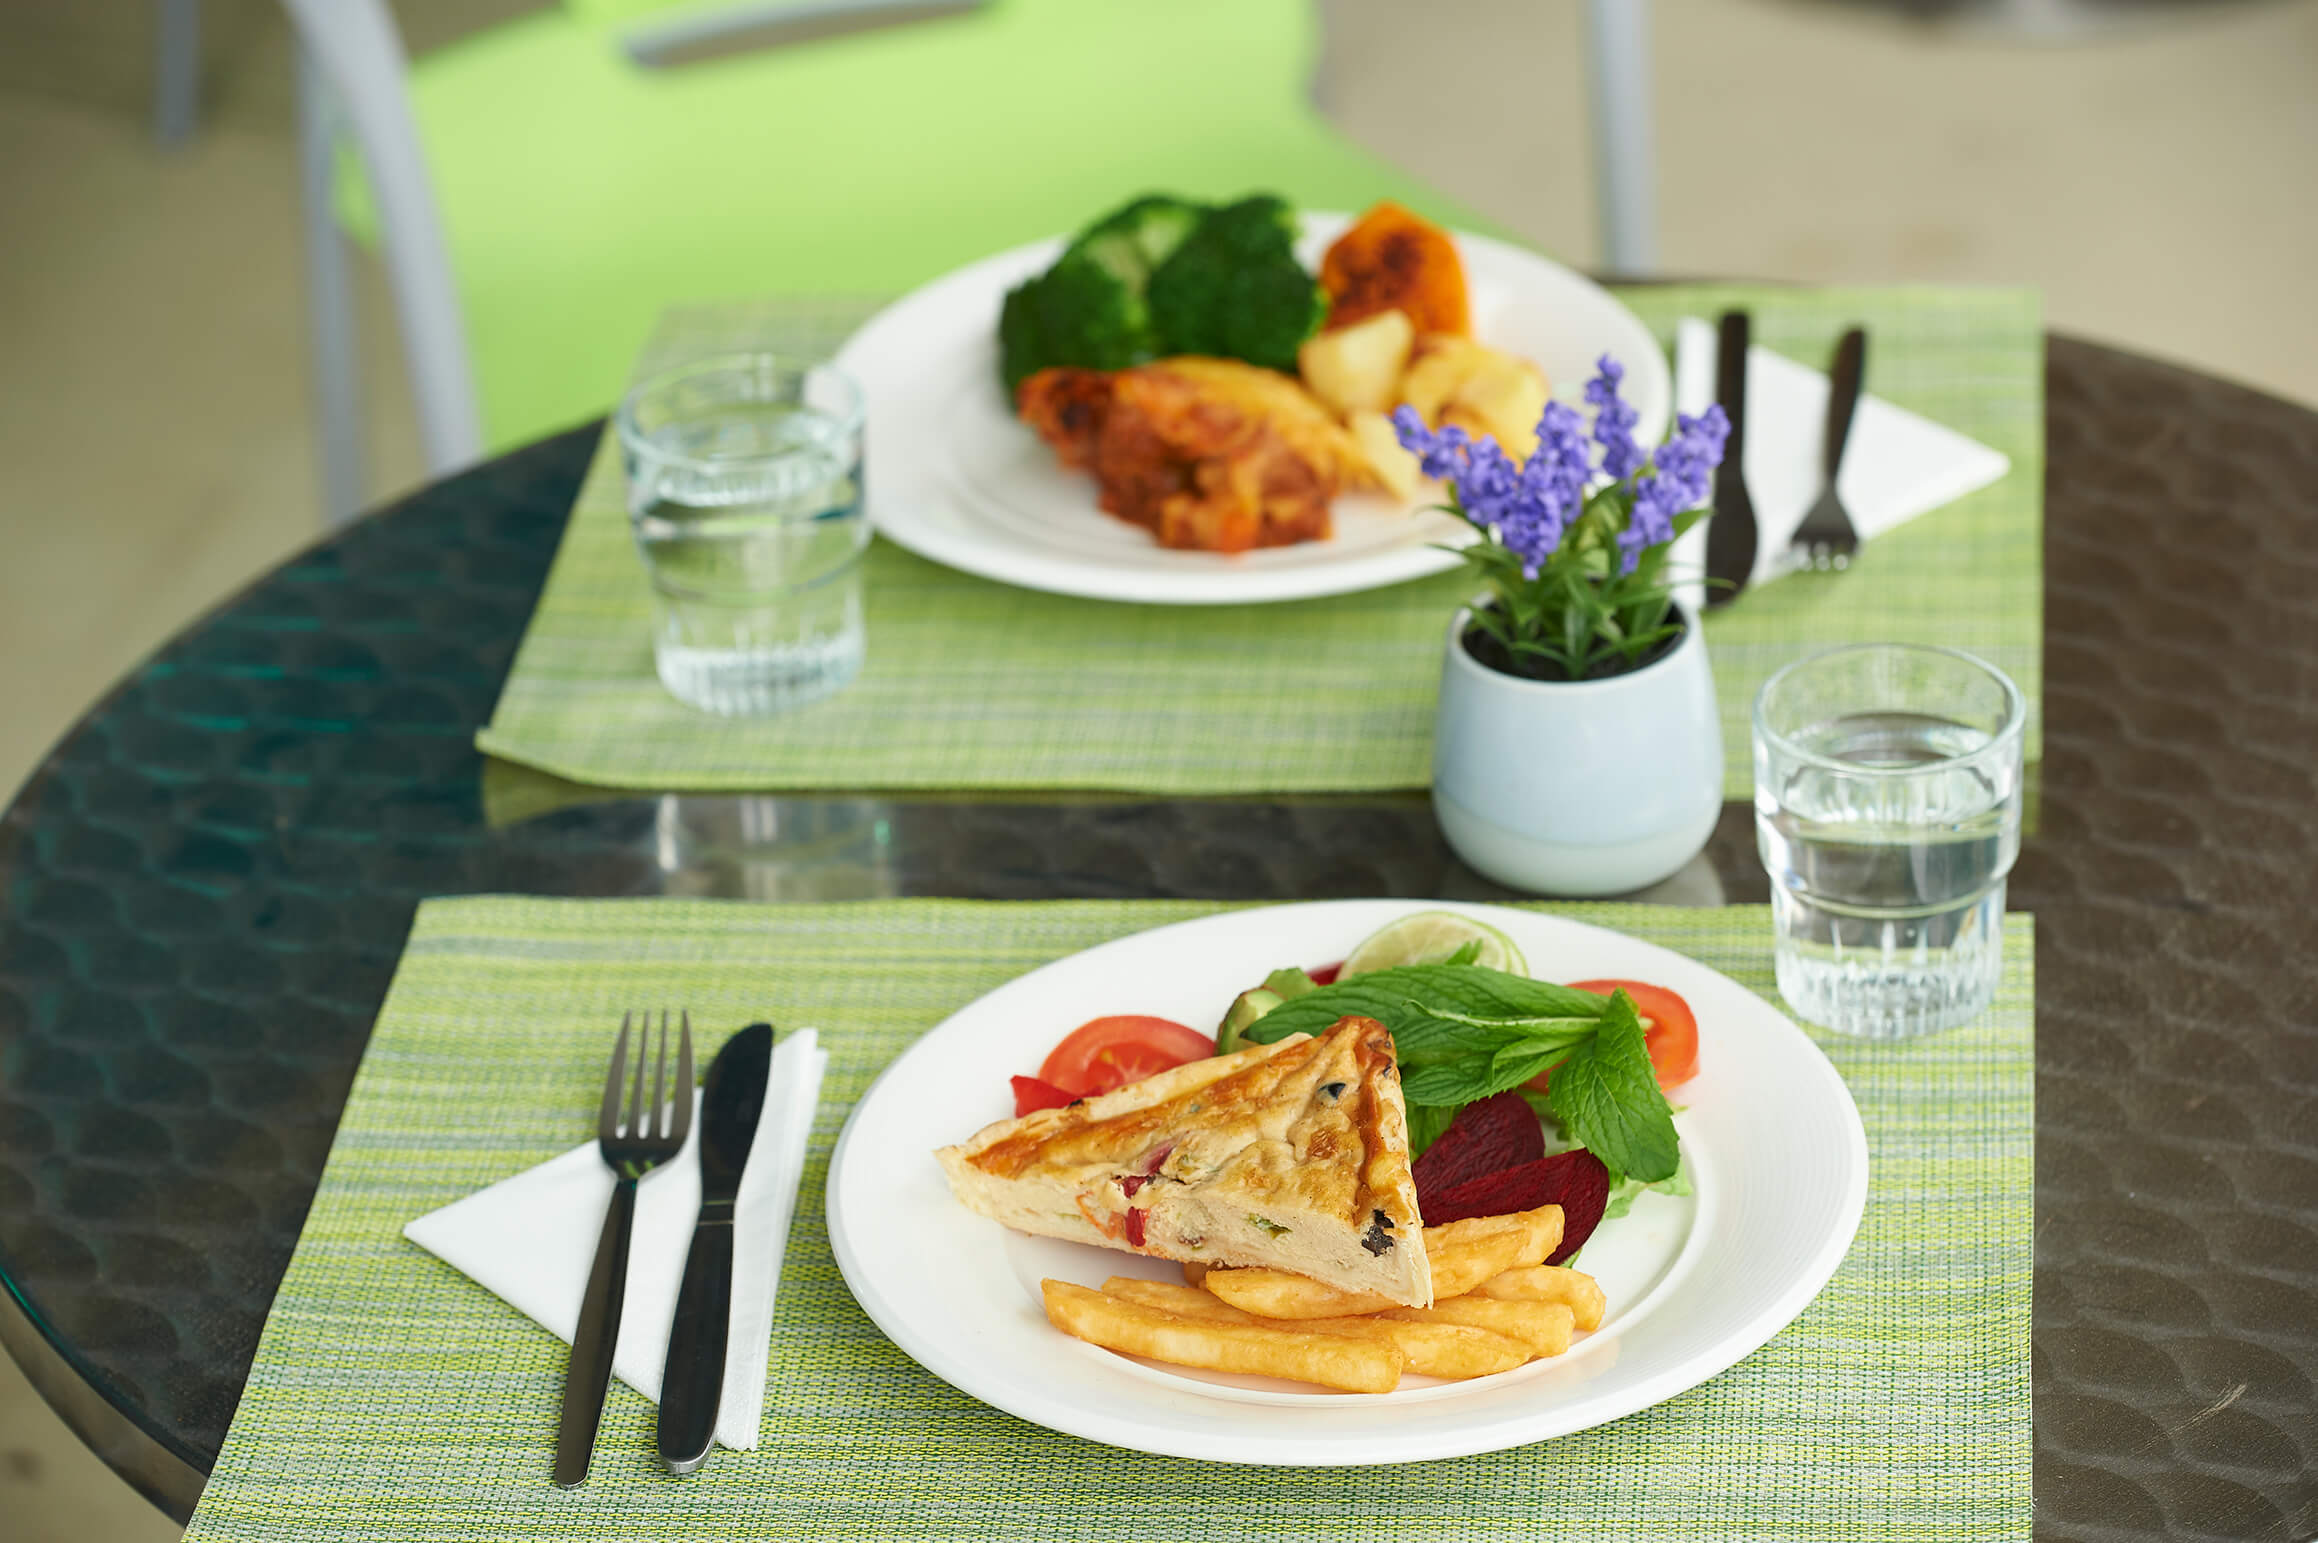 Residential aged care meals prepared onsite